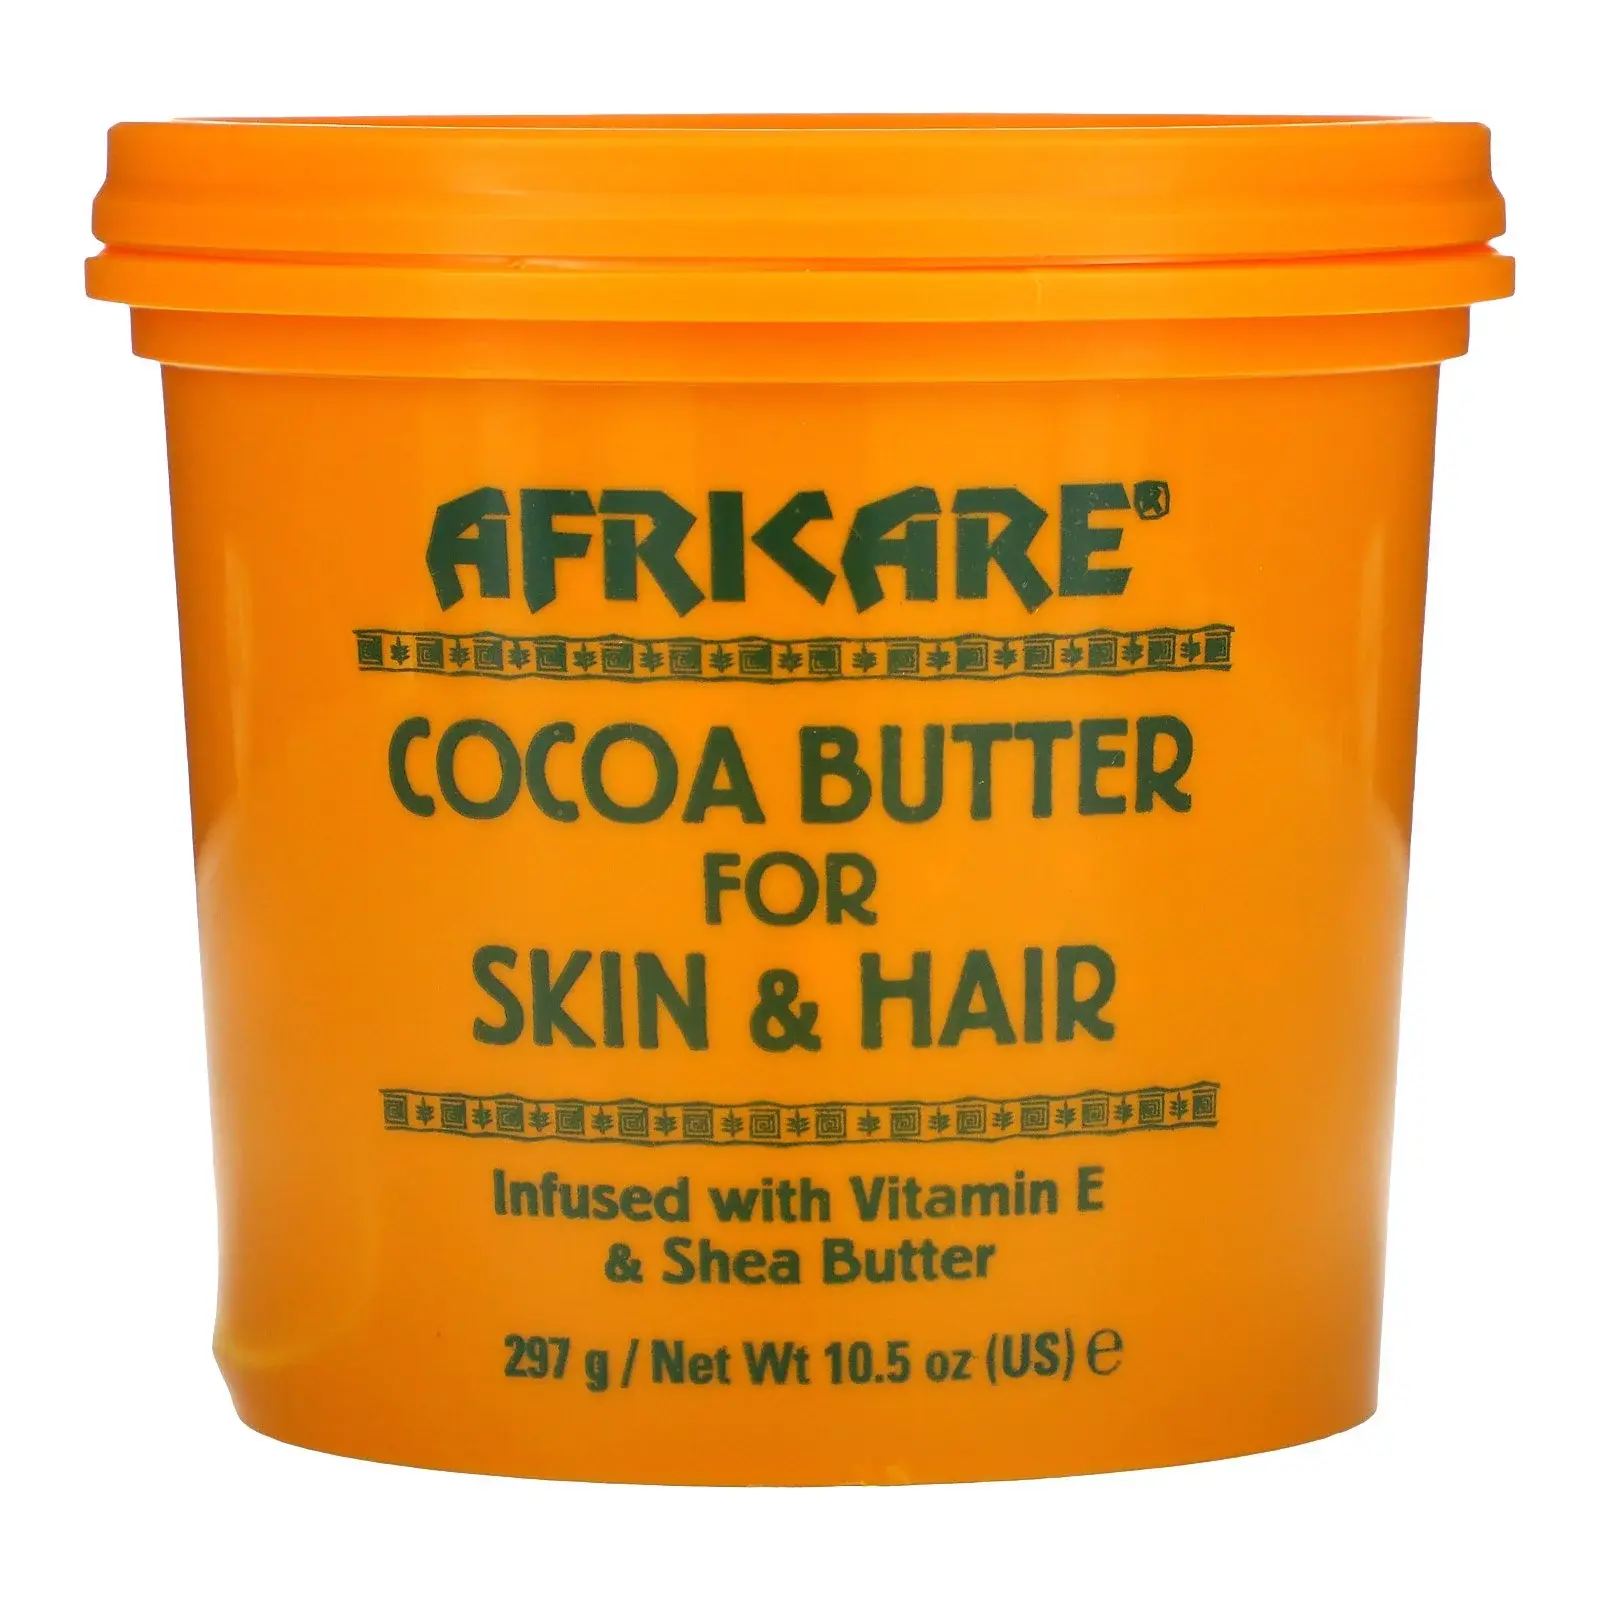 Africare Cocoa Butter For Skin & Hair